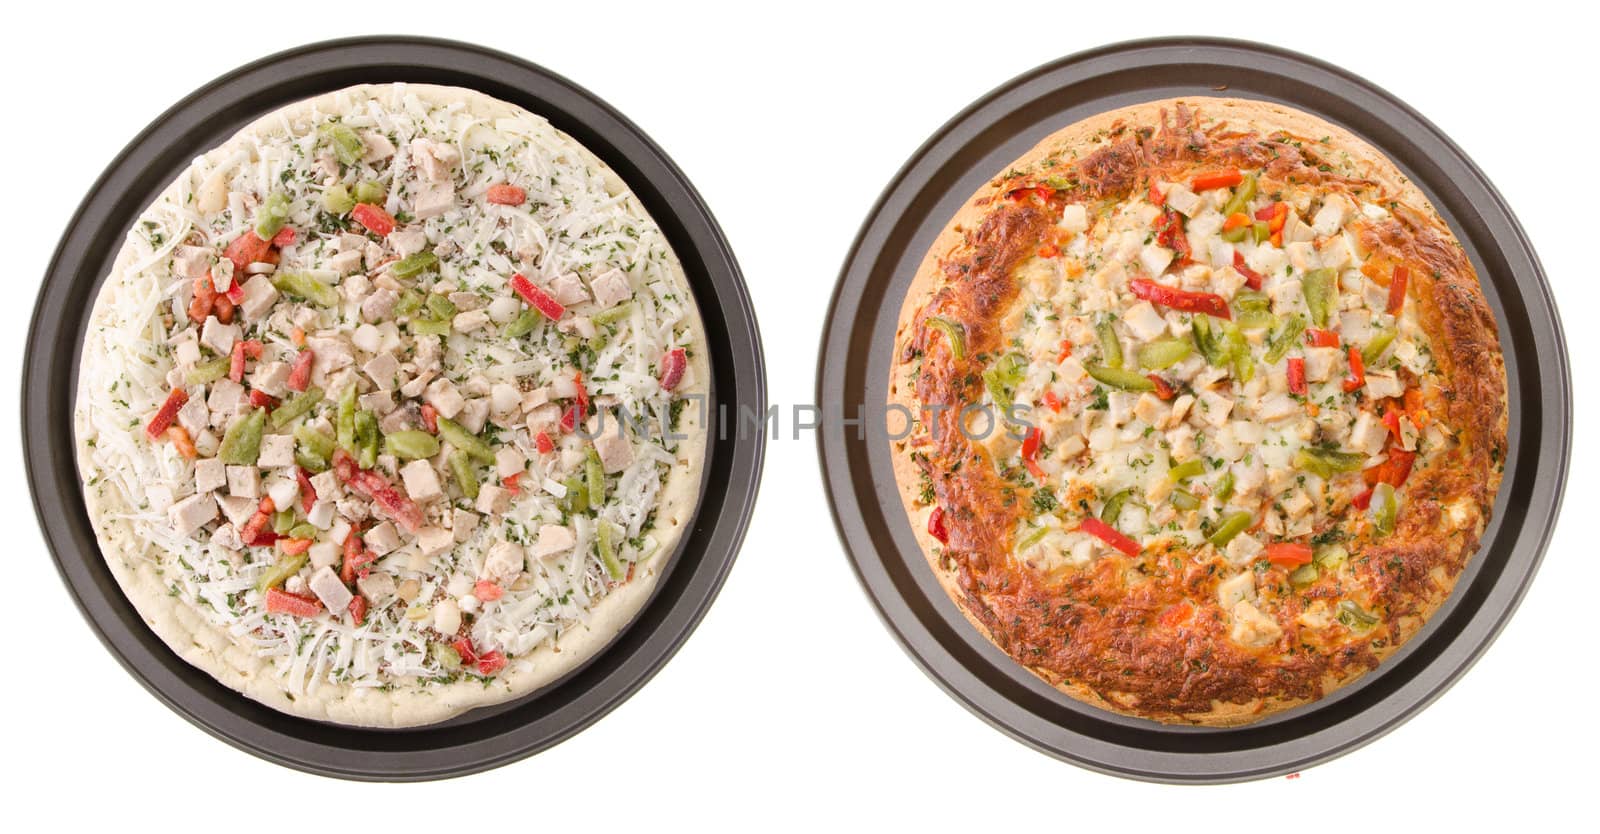 Comparison of a cooked and uncooked chicken pizza, isolated on a white background.